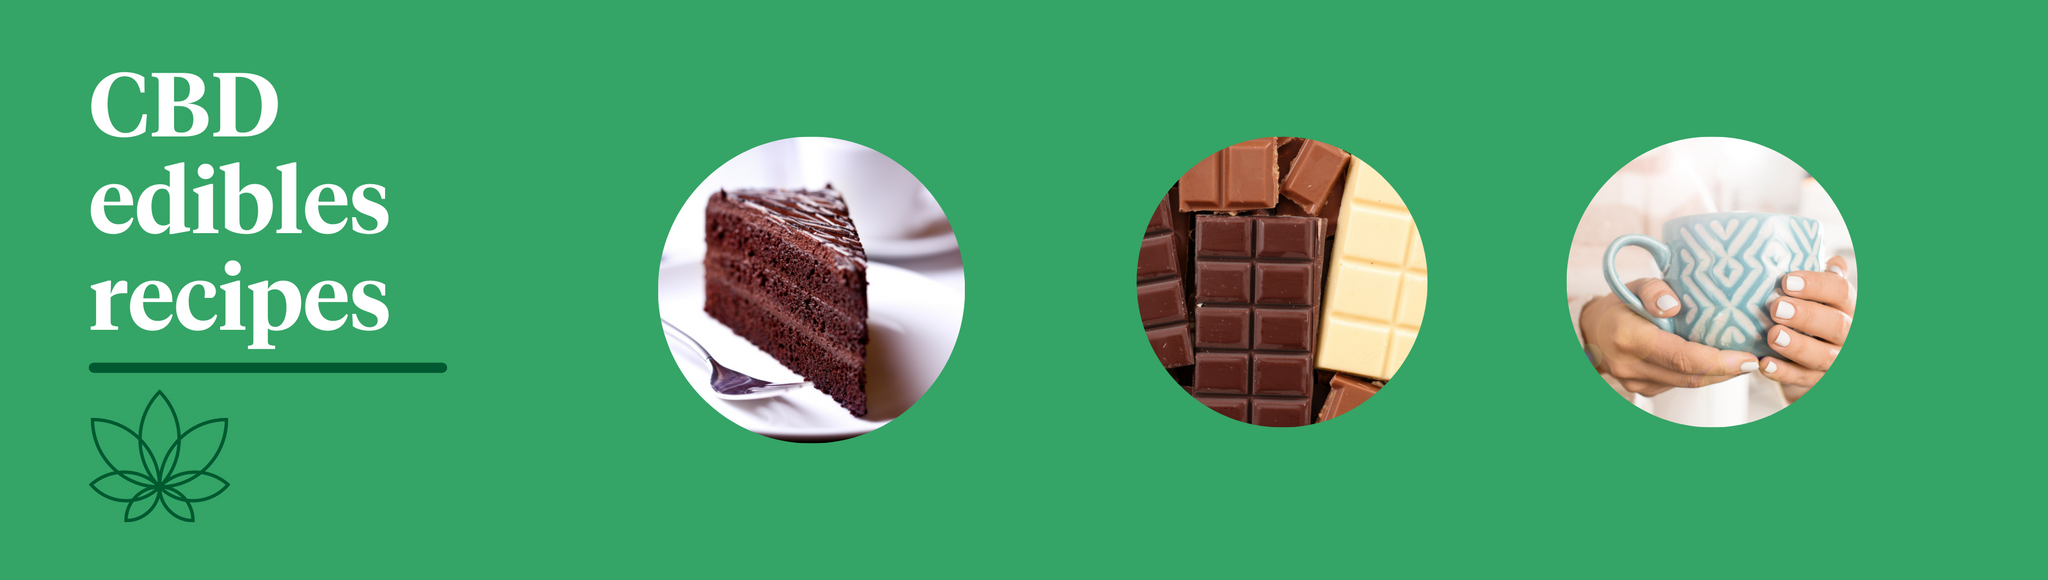 A green background with the Supreme CBD logo showcasing CBD edibles recipes. One image showcasing a chocolate cake, the other shows multiple chocolate bars, one of milk chocolate, two showing dark and a bar of white chocolate. the final image shows a cup of tea.